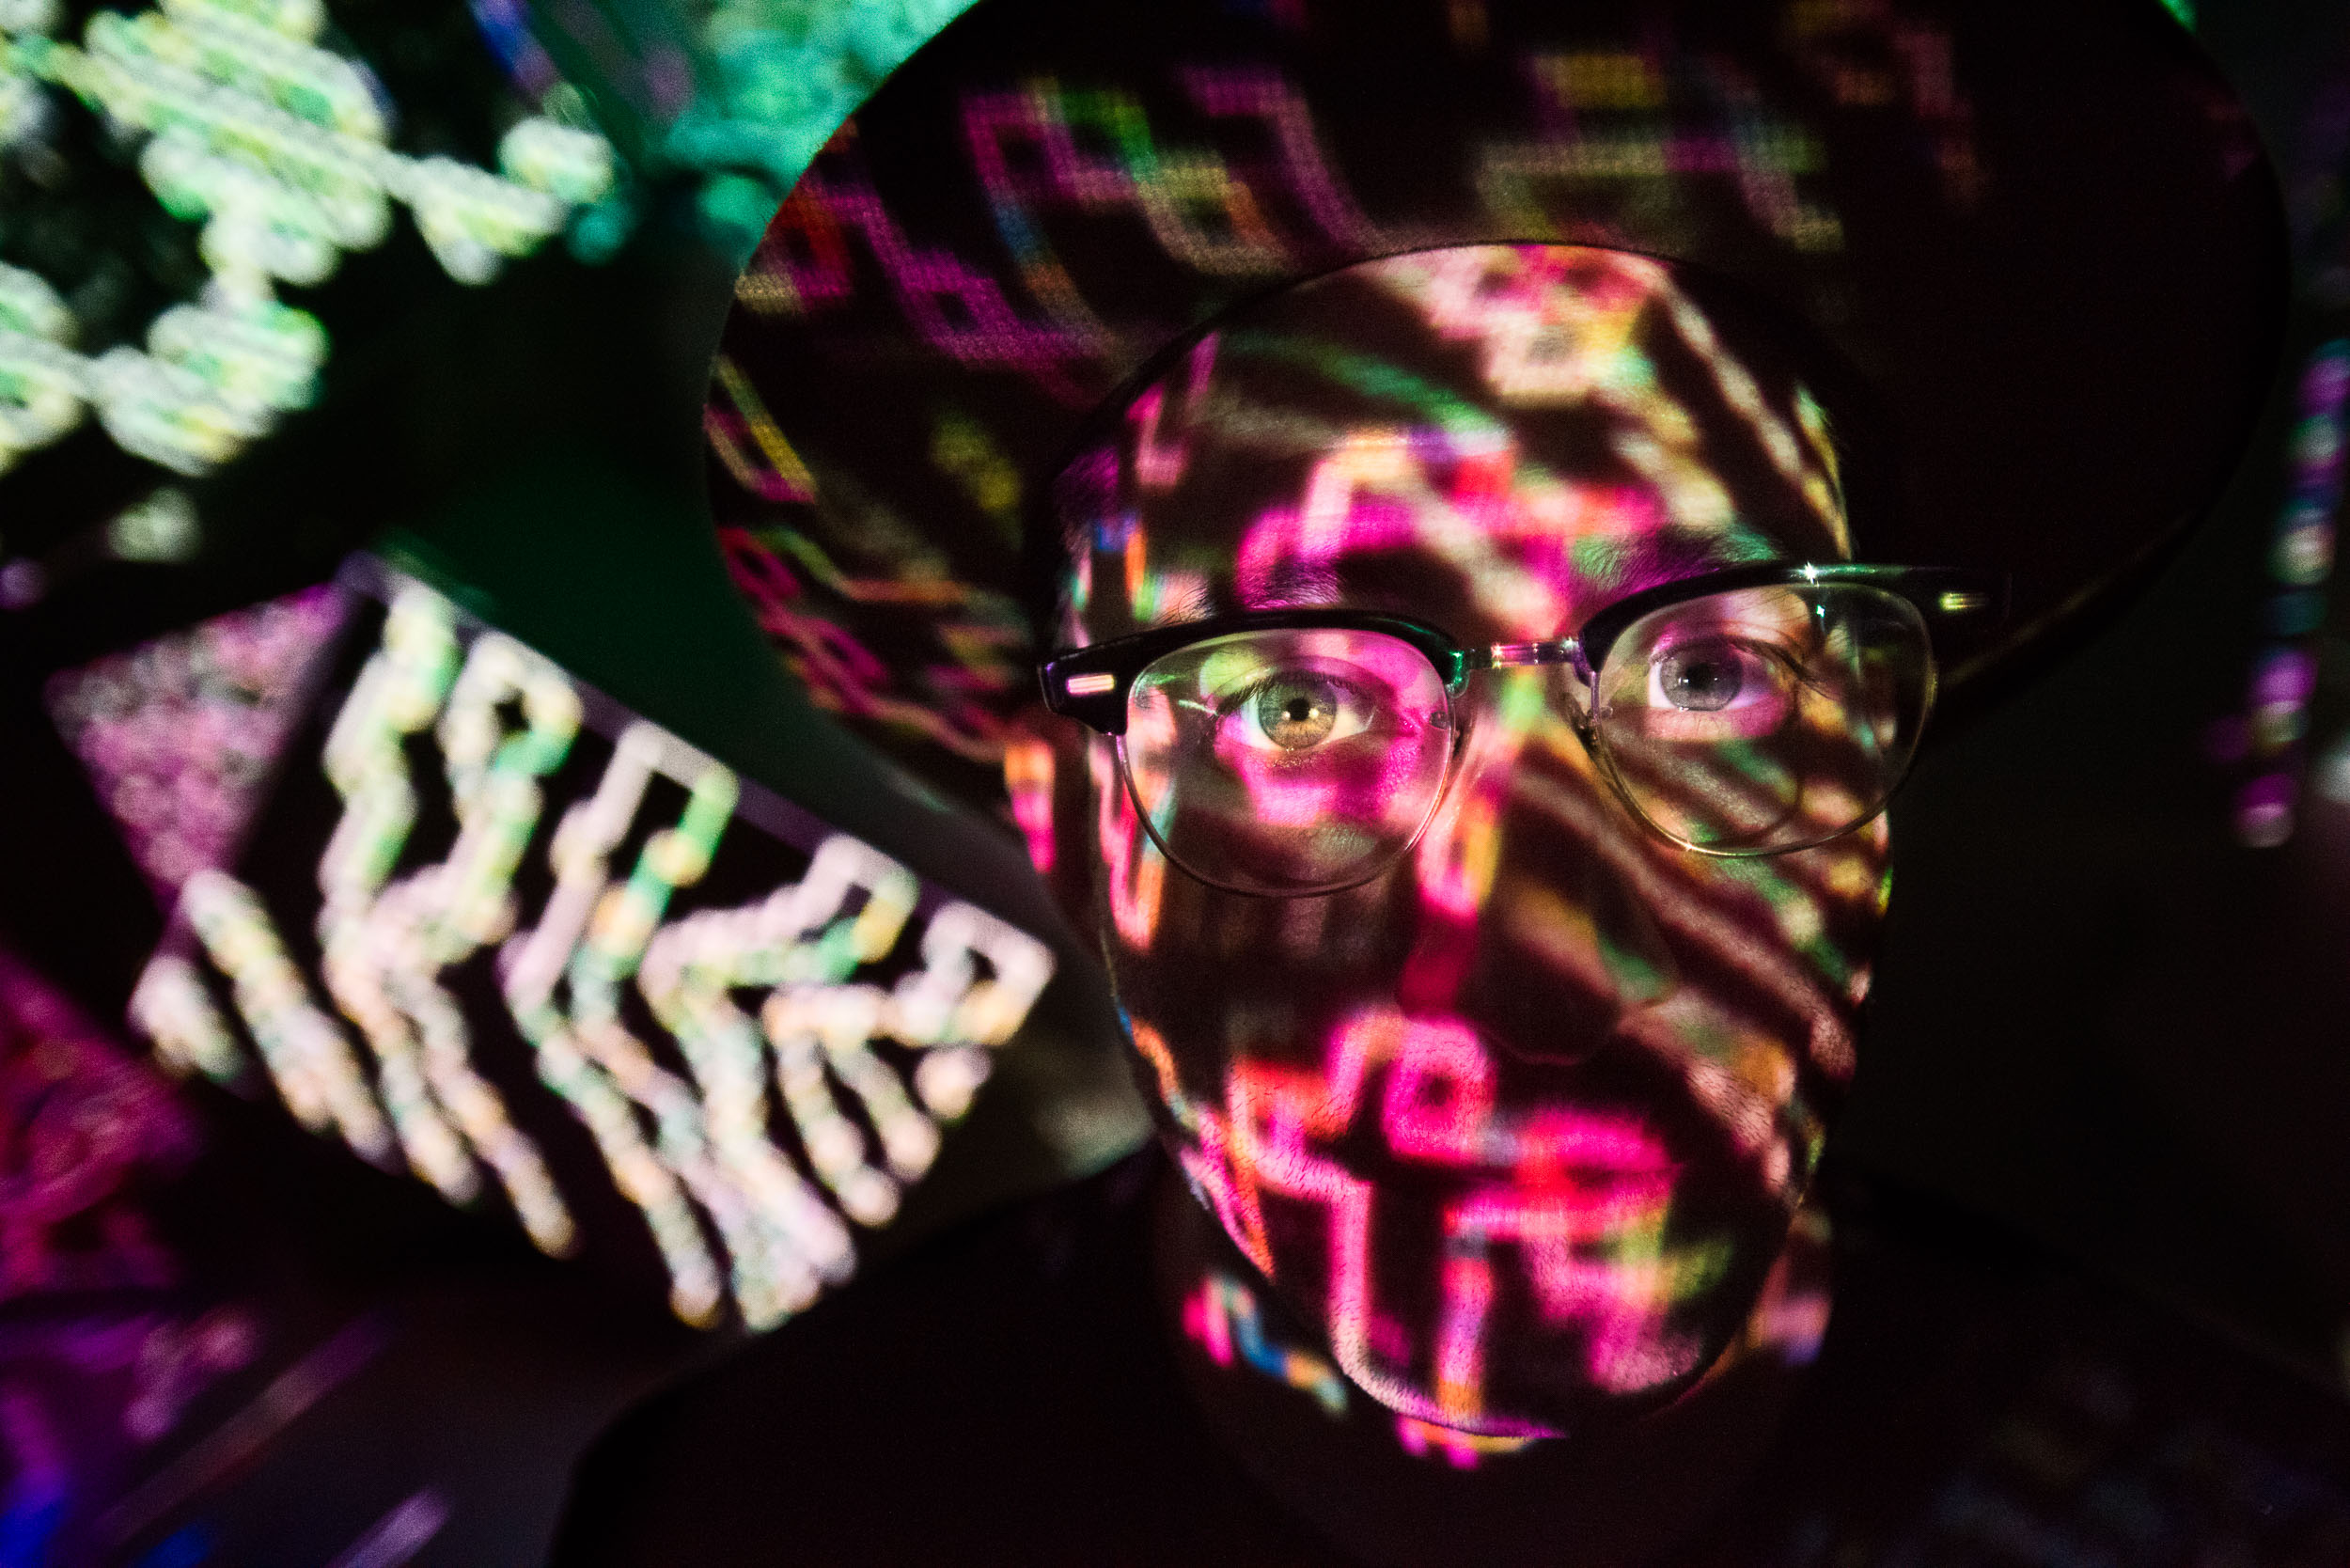 Portrait of artist Aaron Axelrod in front of projector lights in Hollywood.